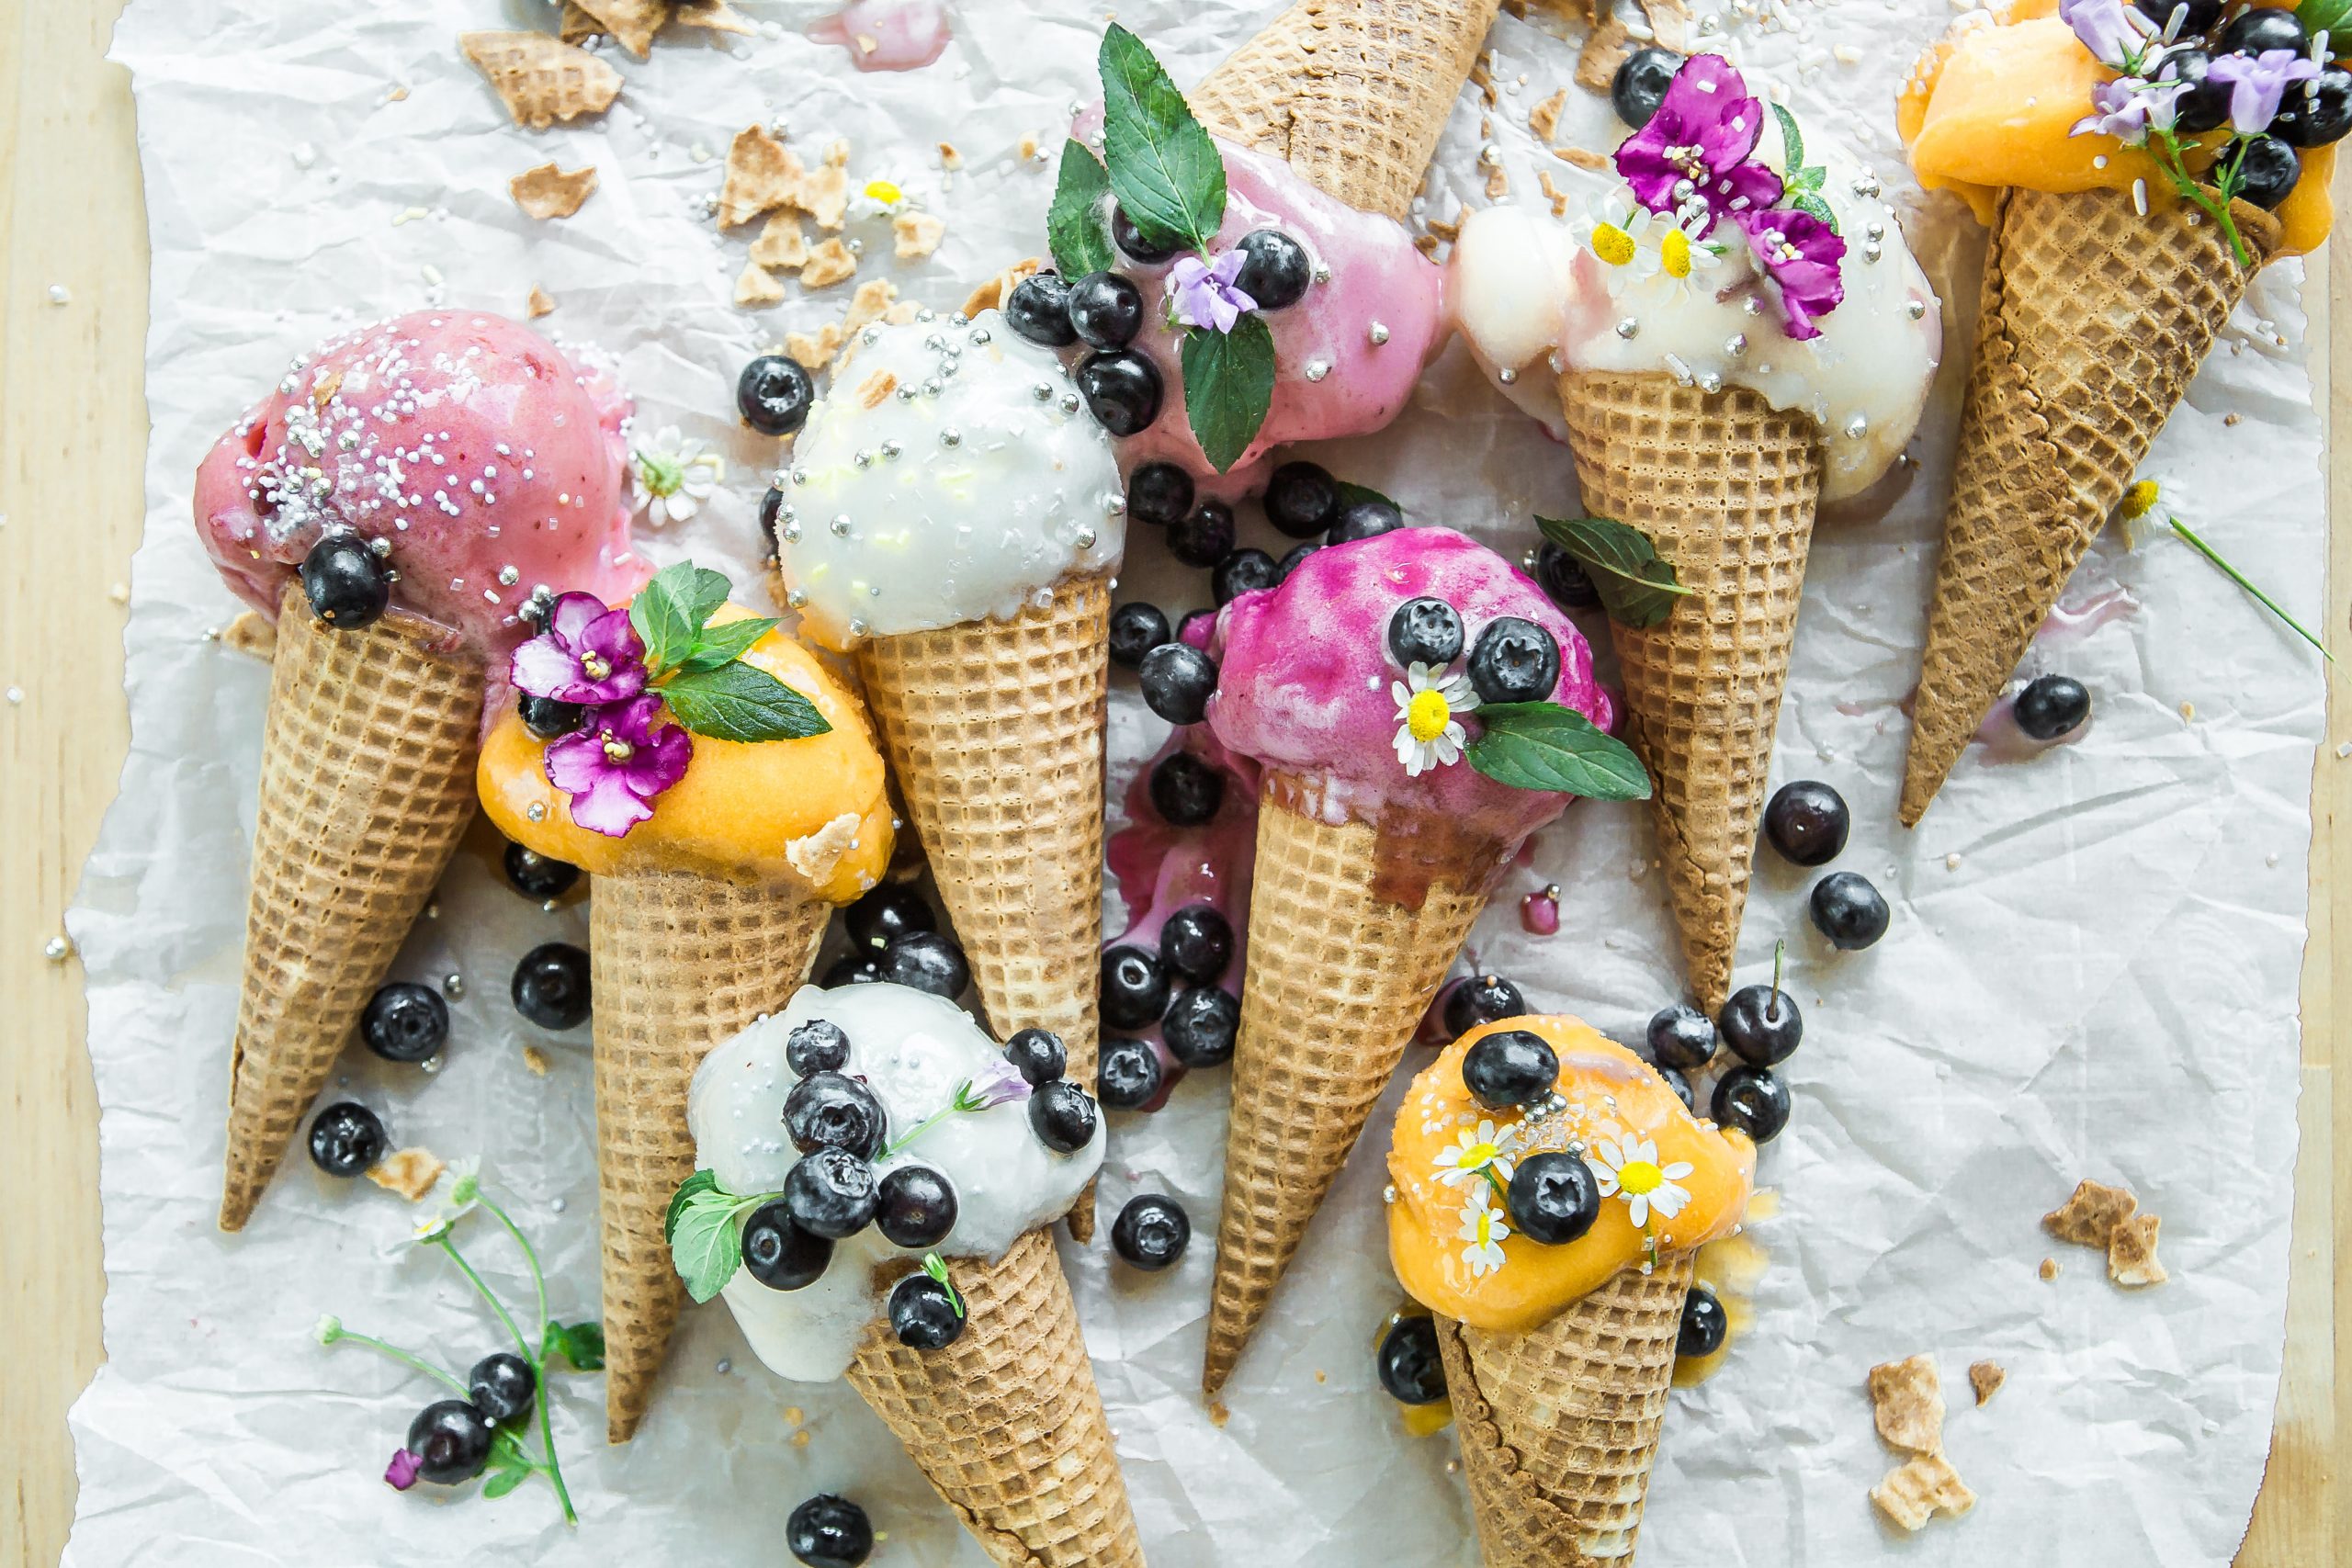 The Best Ice Cream Parlors In The World